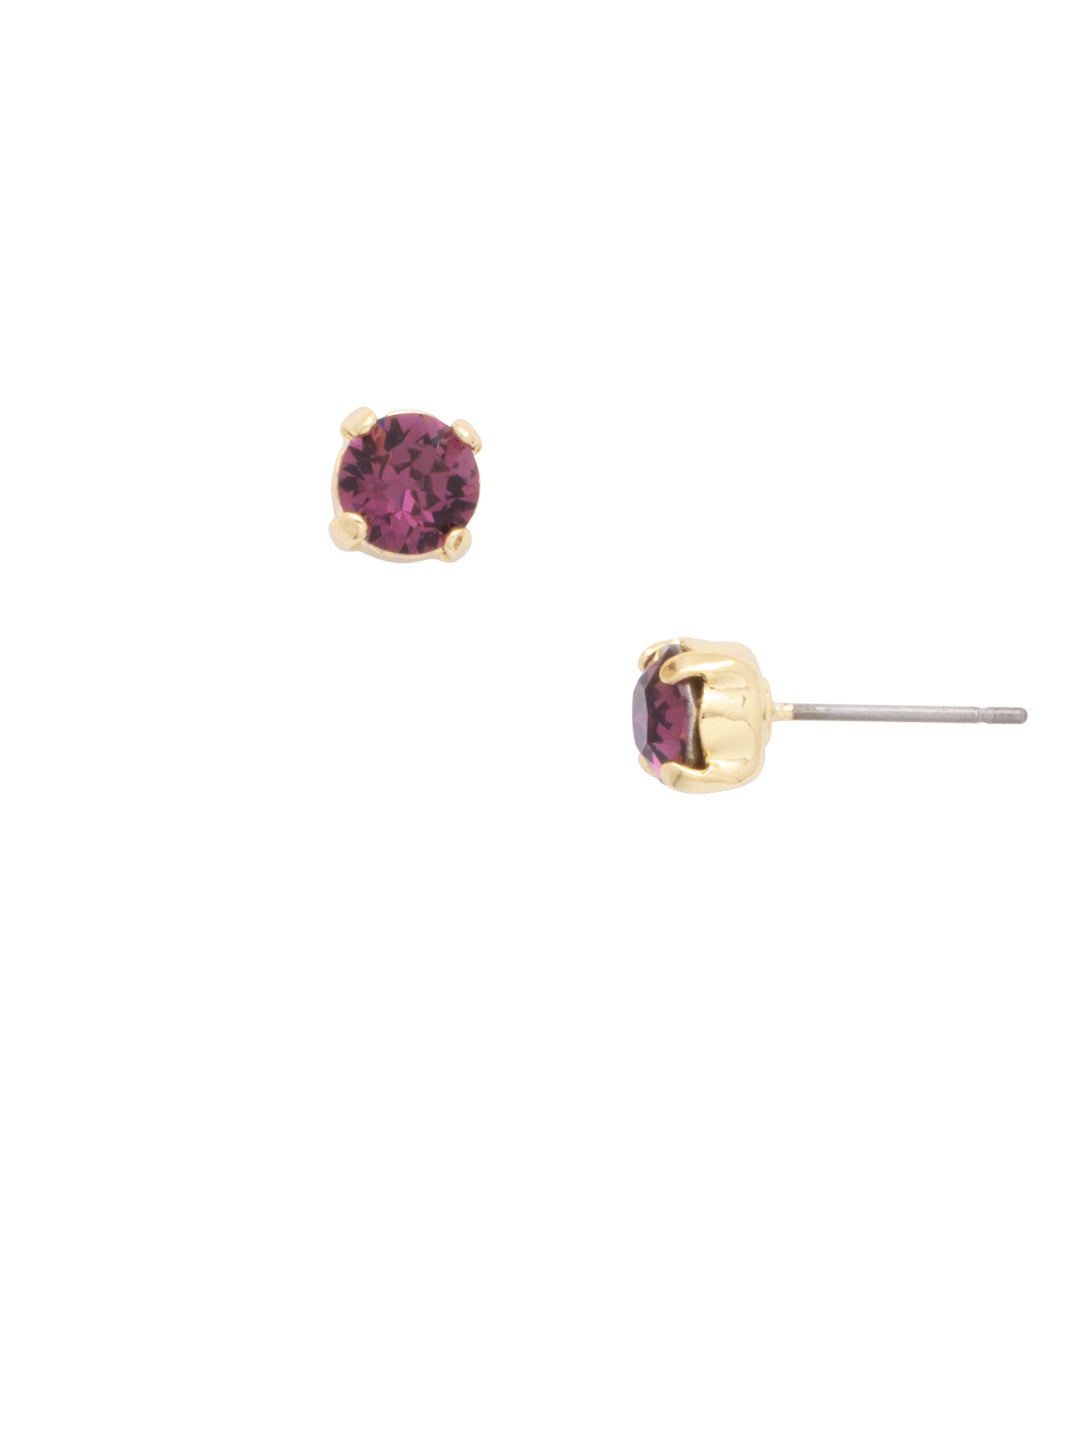 Jayda Stud Earrings - EDN32BGMRL - <p>The Jayda Stud Earrings are the perfect every day wardrobe staple. A round crystal nestles perfectly in a metal plated post with four prongs. </p><p>Need help picking a stud? <a href="https://www.sorrelli.com/blogs/sisterhood/round-stud-earrings-101-a-rundown-of-sizes-styles-and-sparkle">Check out our size guide!</a> From Sorrelli's Merlot collection in our Bright Gold-tone finish.</p>